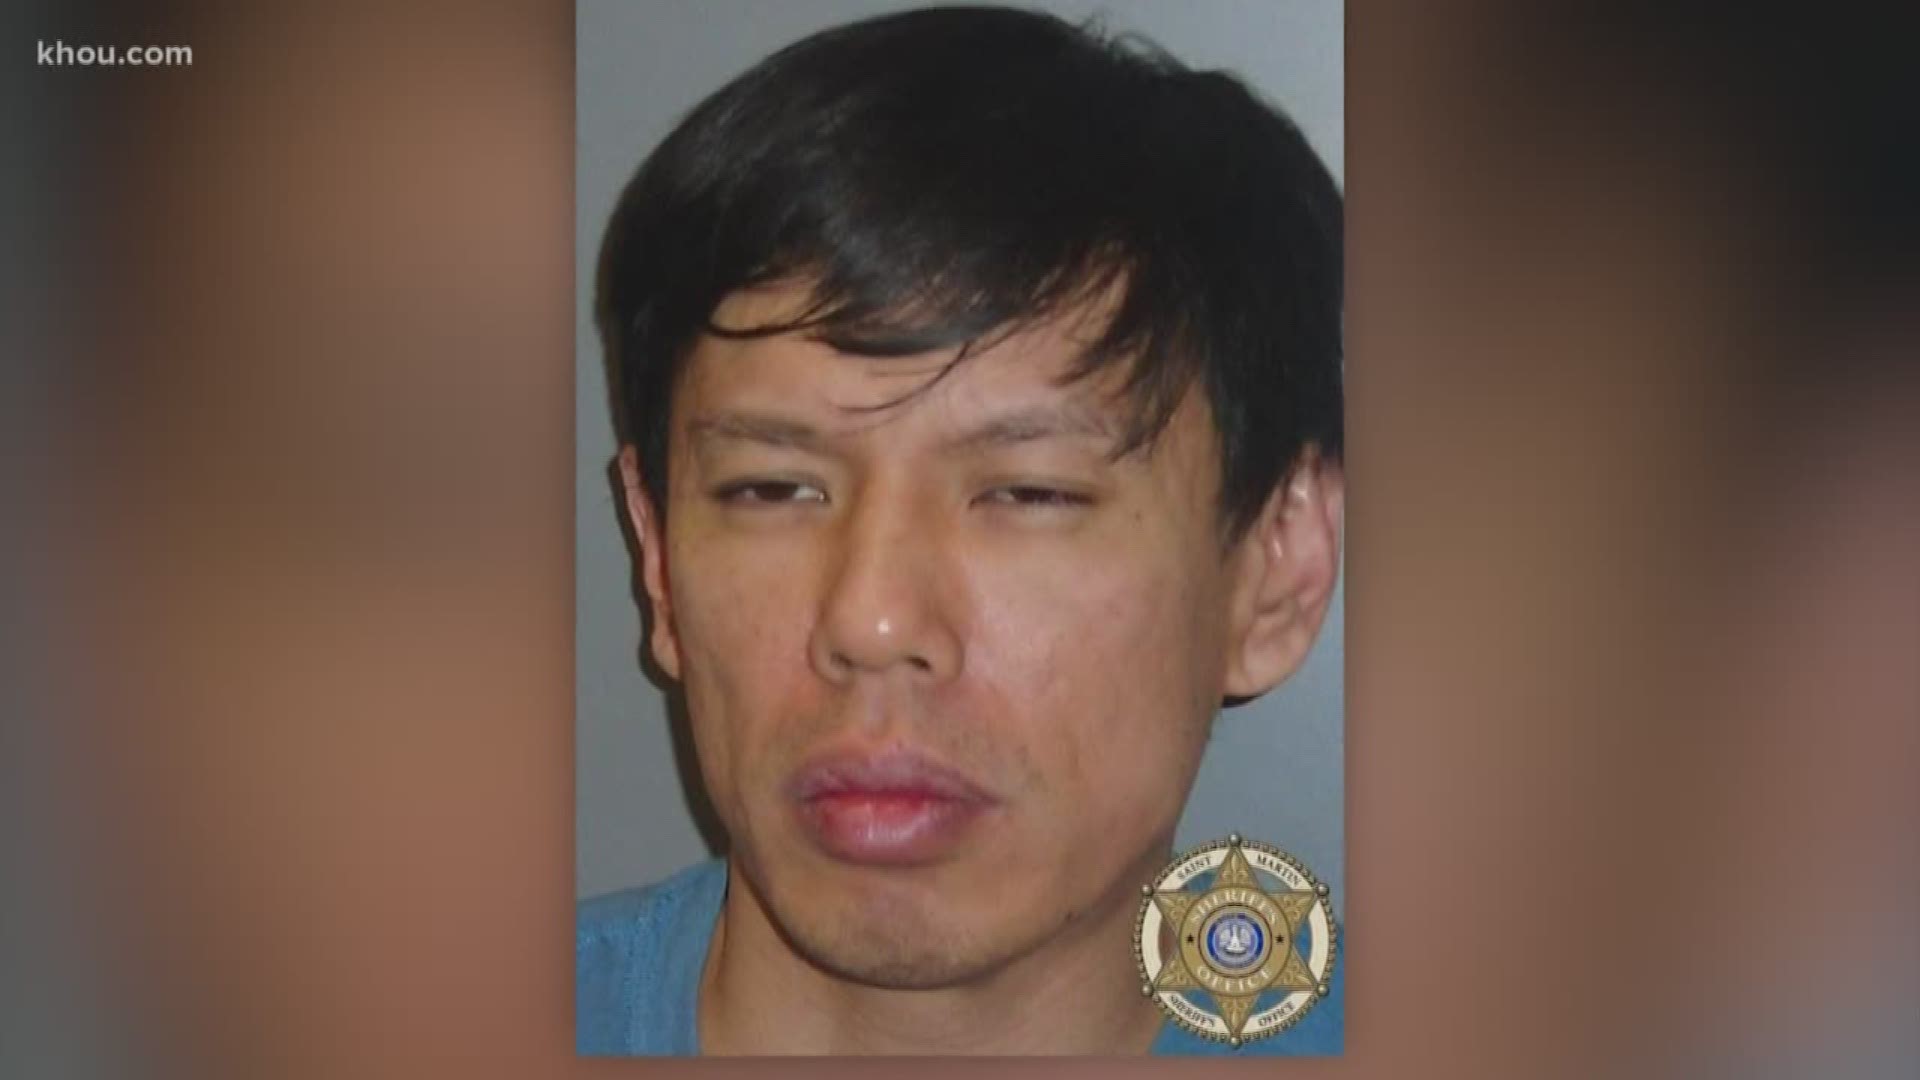 Texas man who murdered wife and fled with children arrested in Louisiana, deputies say khou